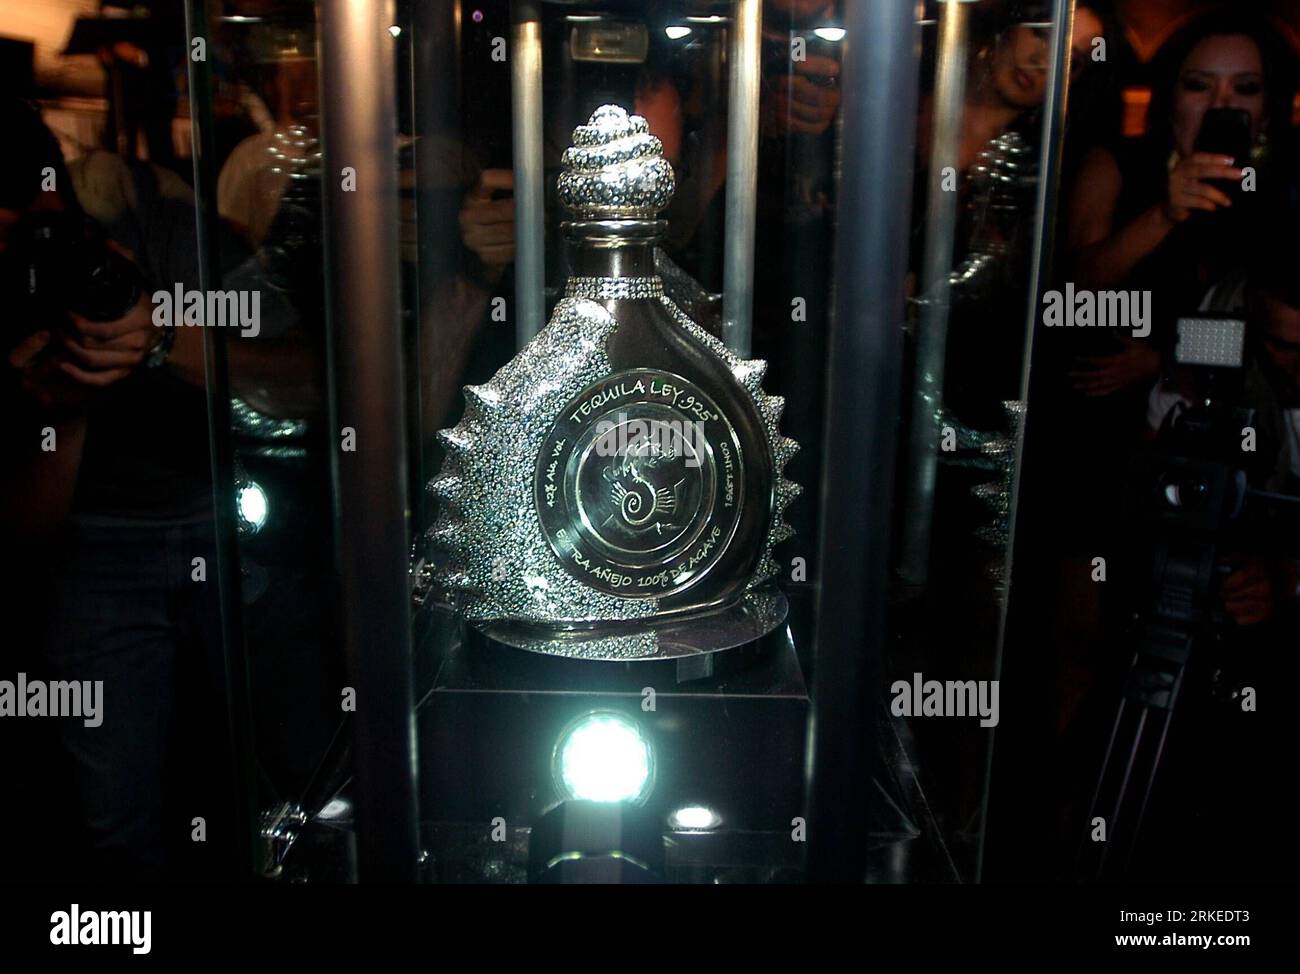 Bildnummer: 55244007  Datum: 06.04.2011  Copyright: imago/Xinhua (110407) -- GUADALAJARA, April 7, 2011 (Xinhua) -- Members of the tequila company Hacienda la Capilla present the world s most expensive bottle of tequila, at the Cabanas Cultural Institute, in Guadalajara, Mexico, on April 6, 2011. The bottle is valued at 3.5 millon dollars and was made with 4,100 diamonds of 328.5 carats and 2.3 kg of platinum. (Xinhua/Felipe Salgado) (jl) MEXICO-GUADALAJARA-TEQUILA PUBLICATIONxNOTxINxCHN Kultur Objekte kbdig xsk 2011 quer o0 Flasche, Tequilaflasche, Luxus, Alkohol    Bildnummer 55244007 Date 0 Stock Photo